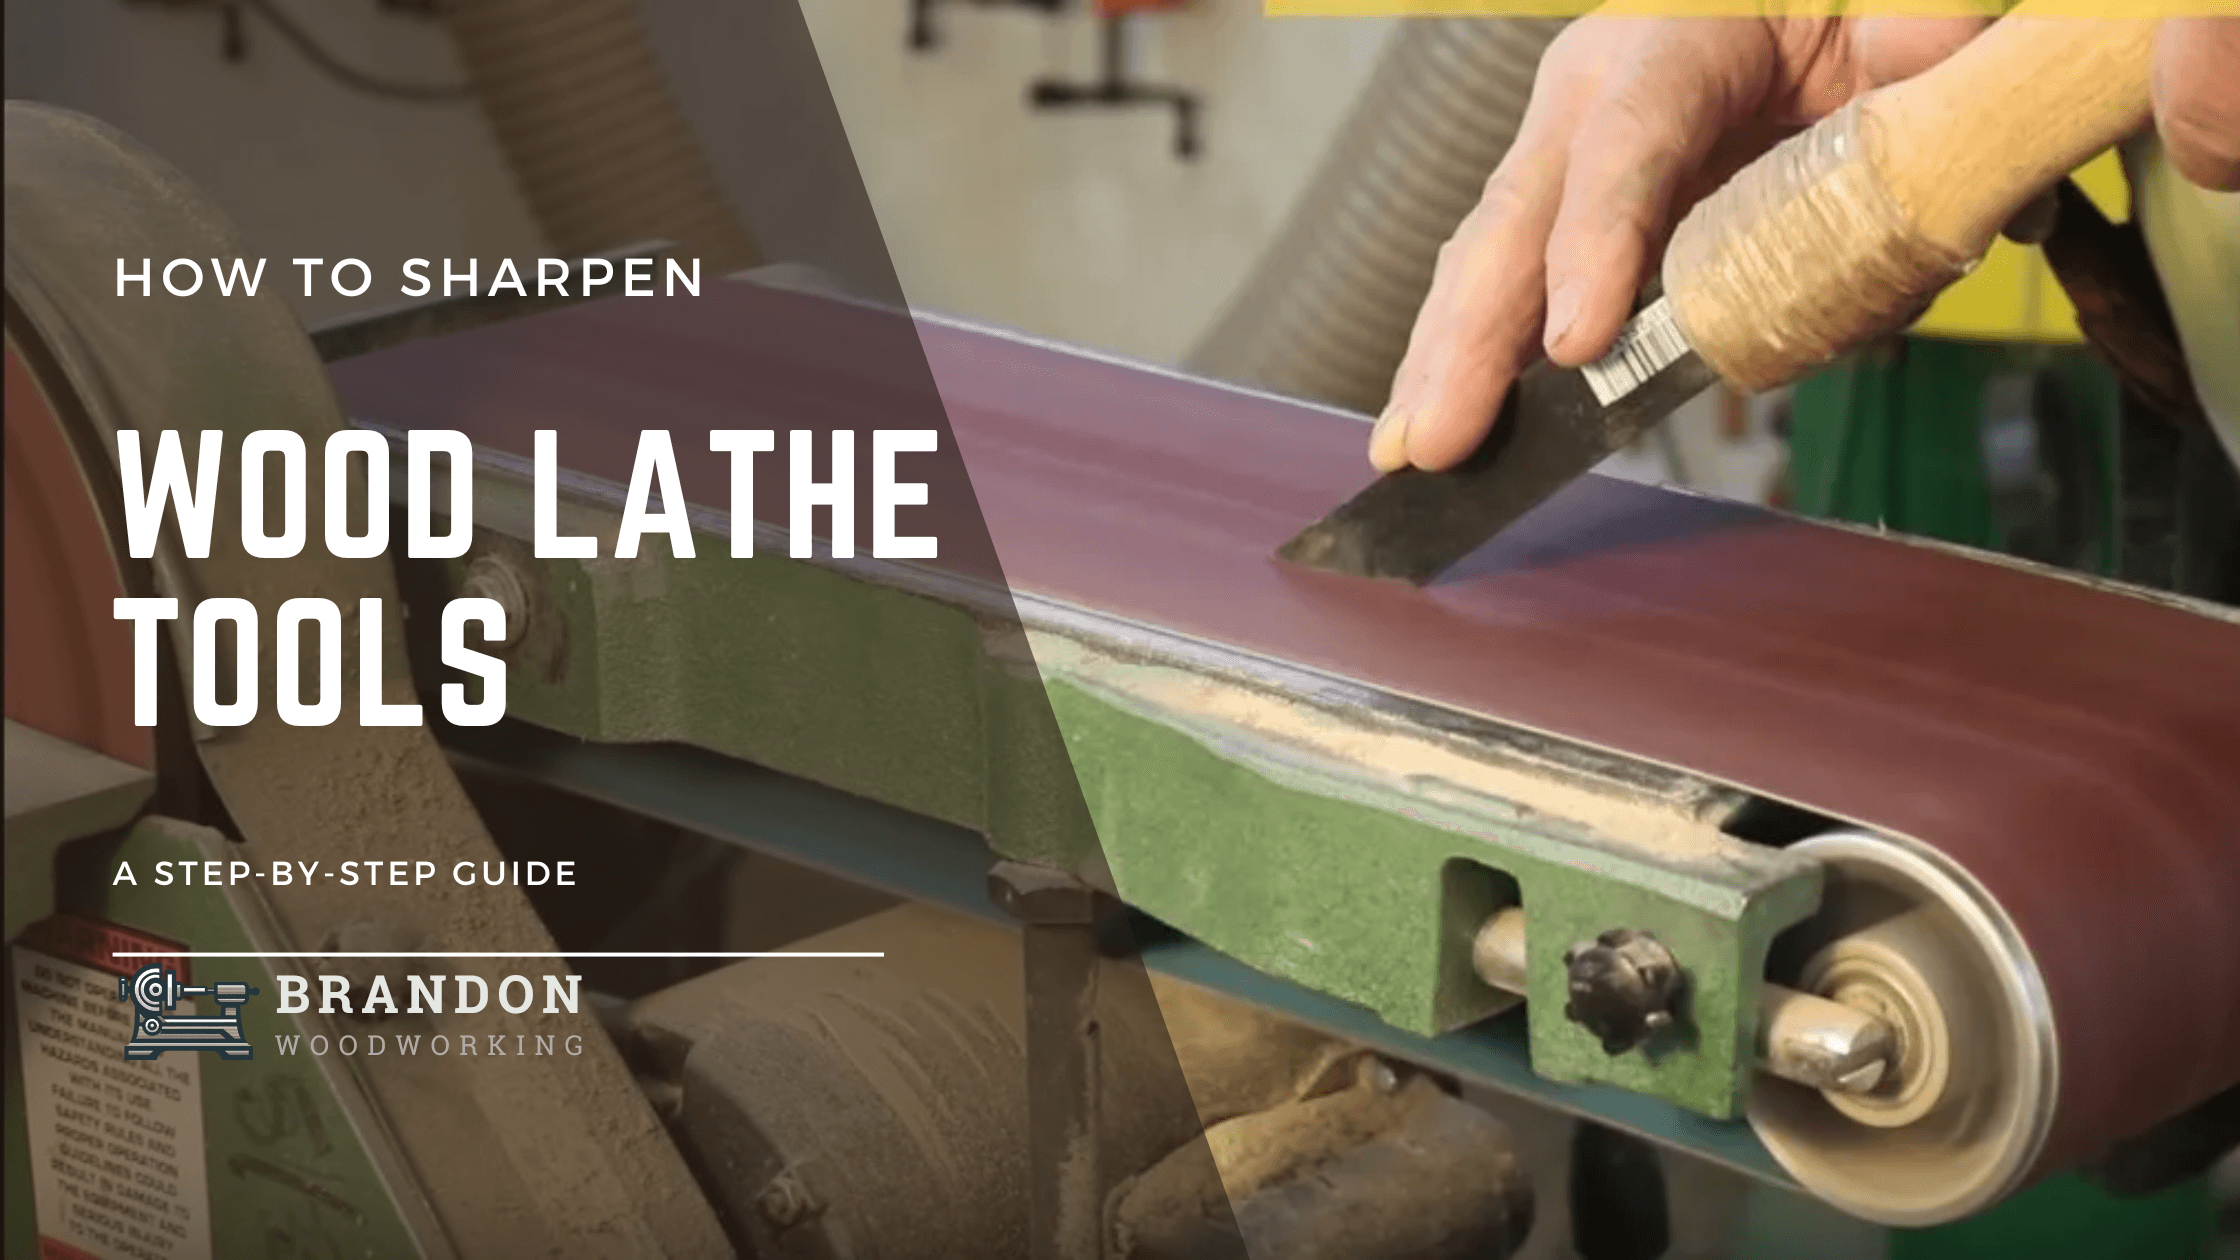 How to Sharpen Wood Lathe Tools